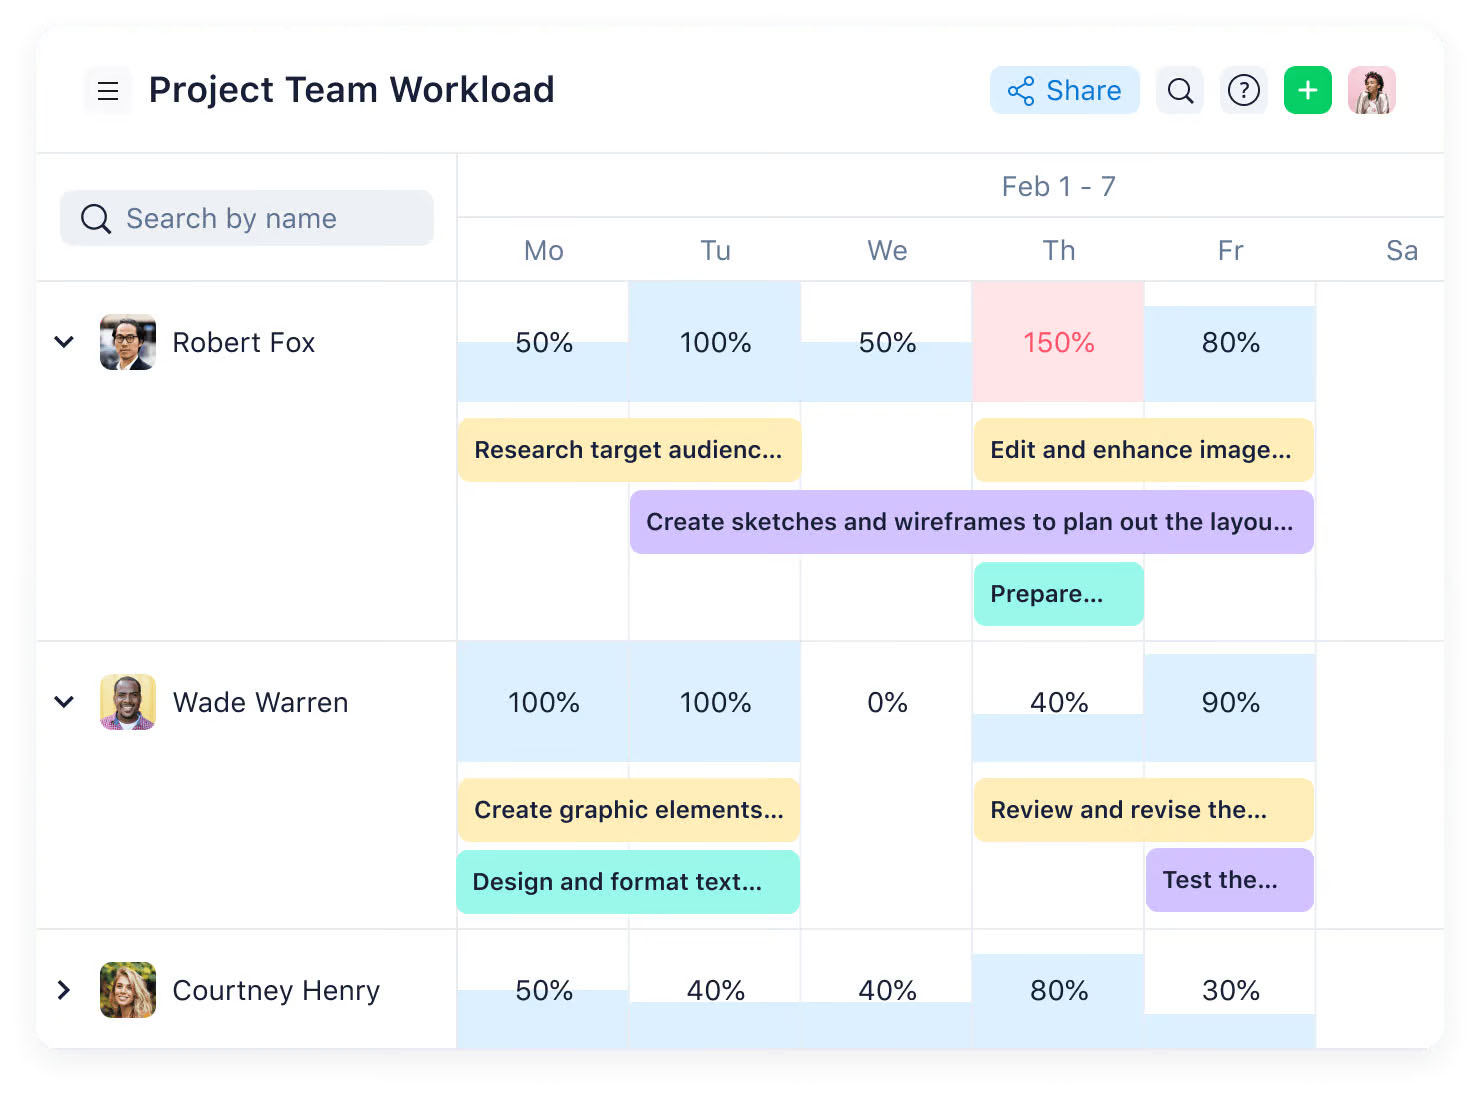 Wrike workload chart with weekly task schedule of team members and percentage of completion.